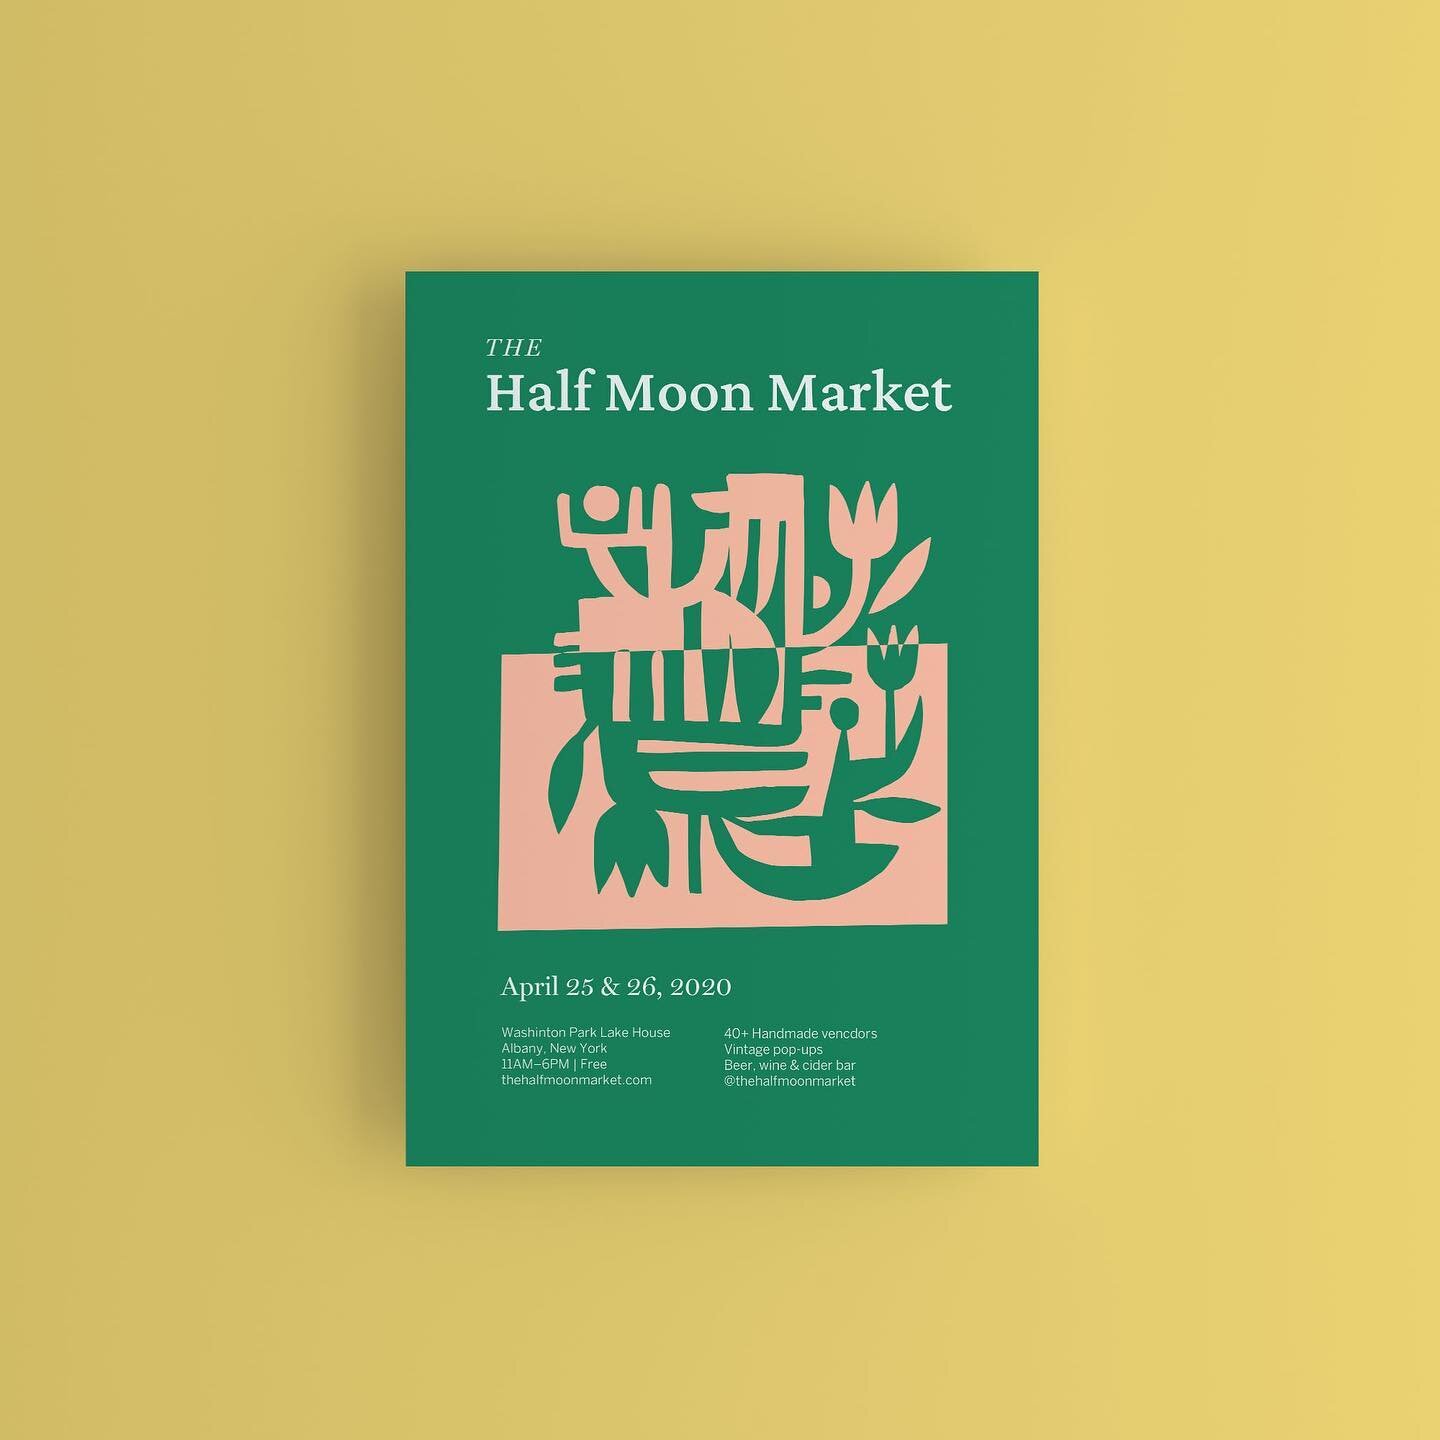 Feeling a little nostalgic for @thehalfmoonmarket (which is sort of on hiatus bc of COVID and life) which is usually this weekend every October! I made this poster for the market intended for Spring 2020 which ultimately had to be canceled but I stil